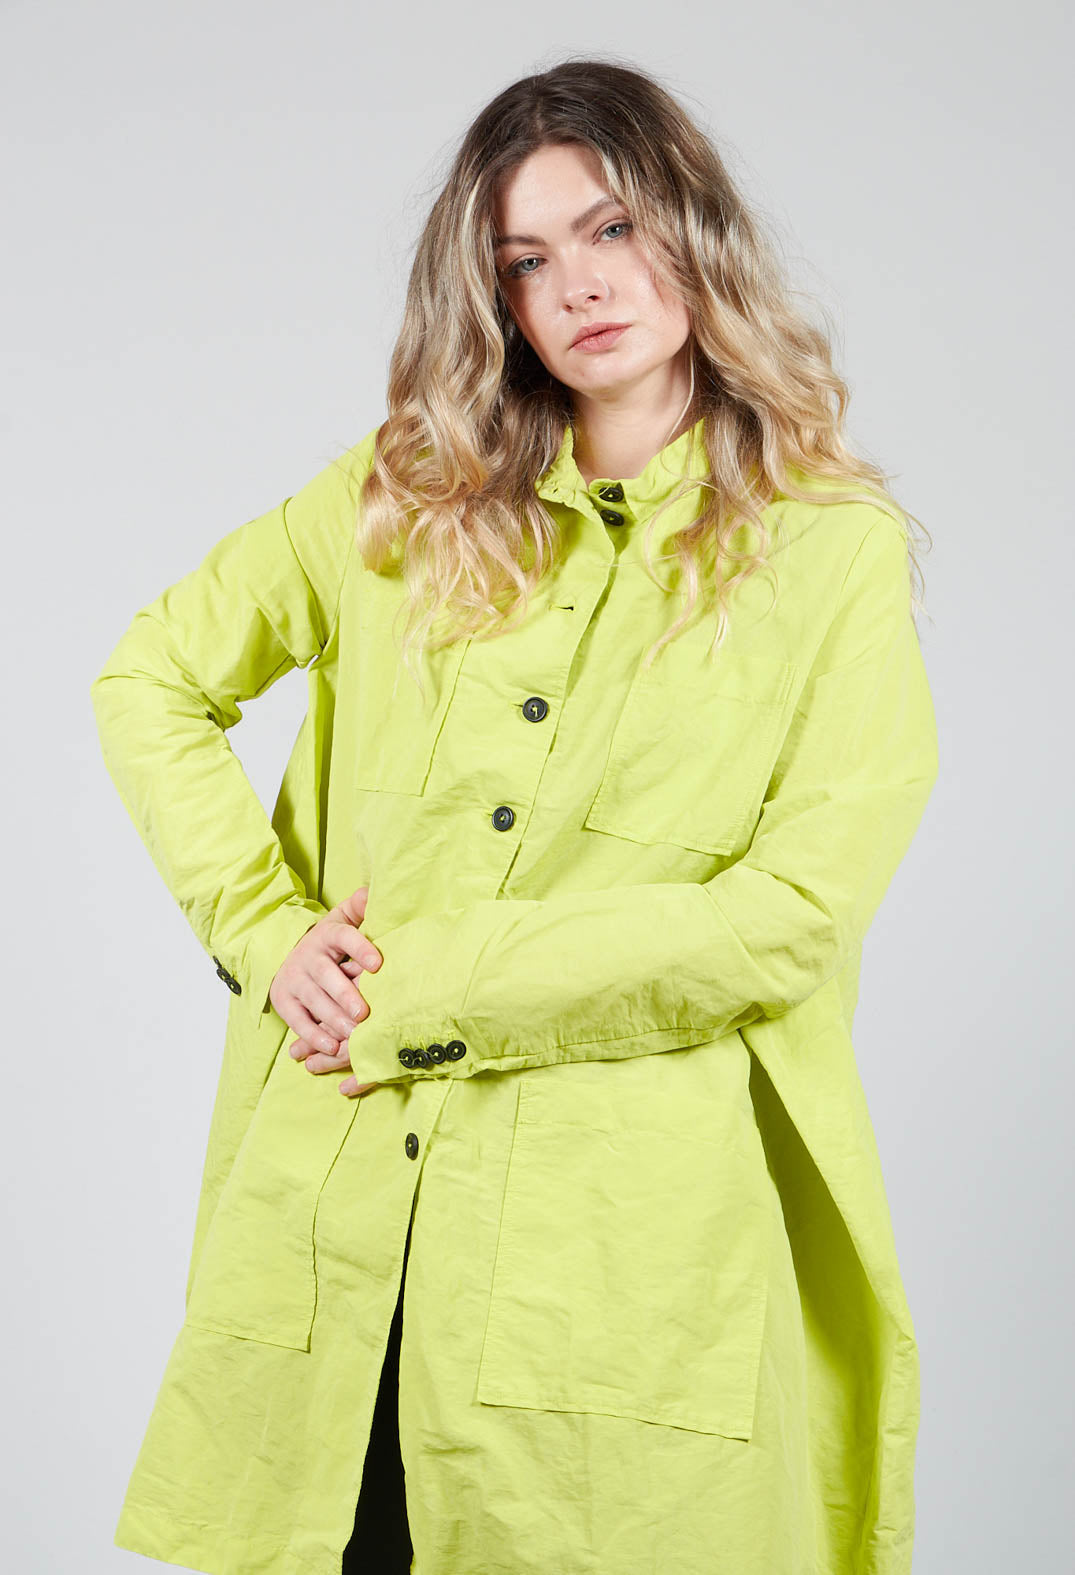 Short Length Coat With Pocket Features in Spring